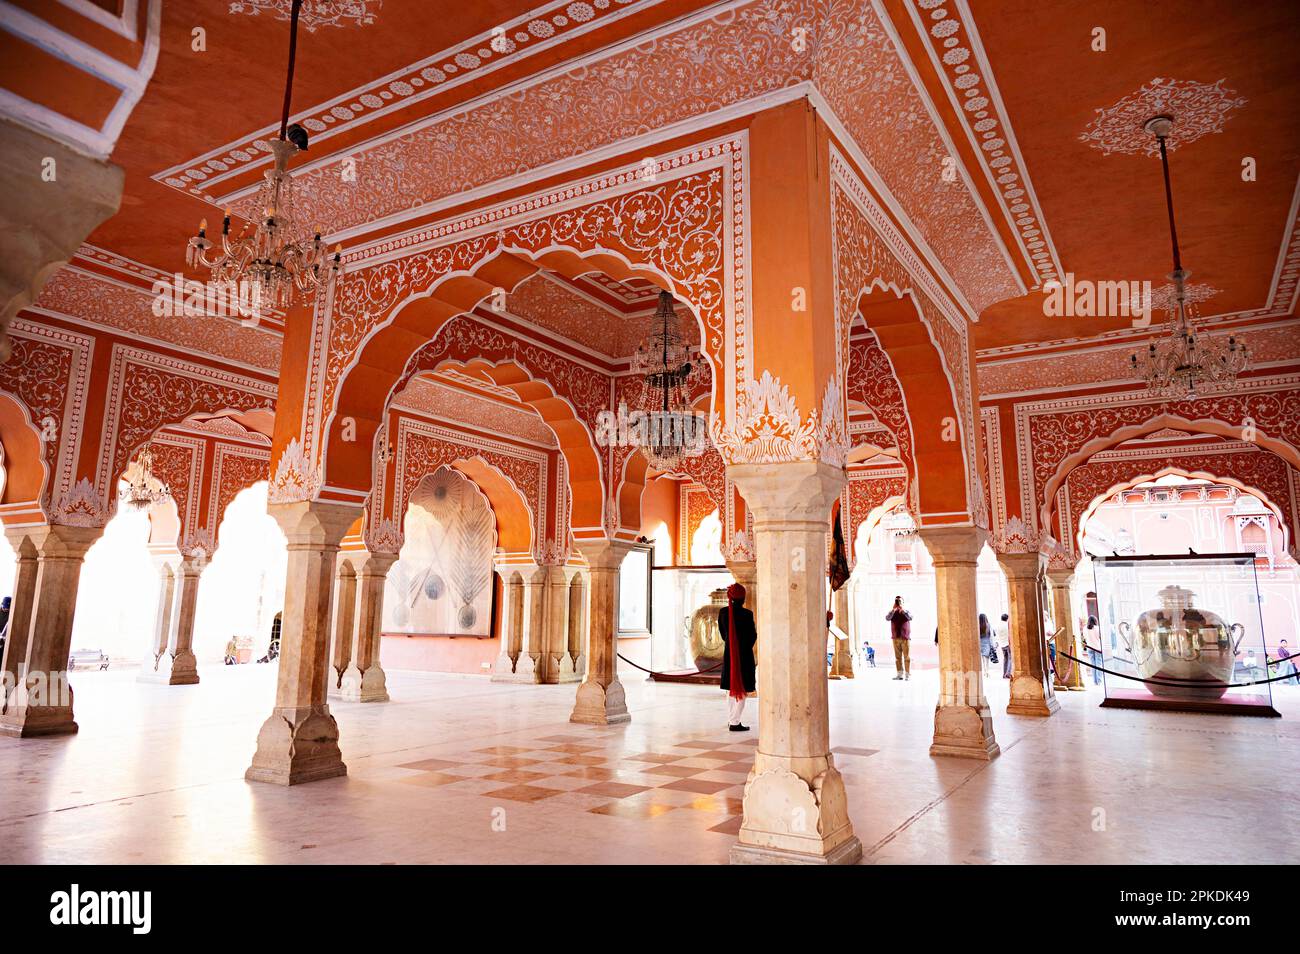 Interiors of the Sarvato Bhadra, a single-storeyed, square, open hall with enclosed rooms at the four corners. City Palace, Jaipur, Rajasthan, India Stock Photo